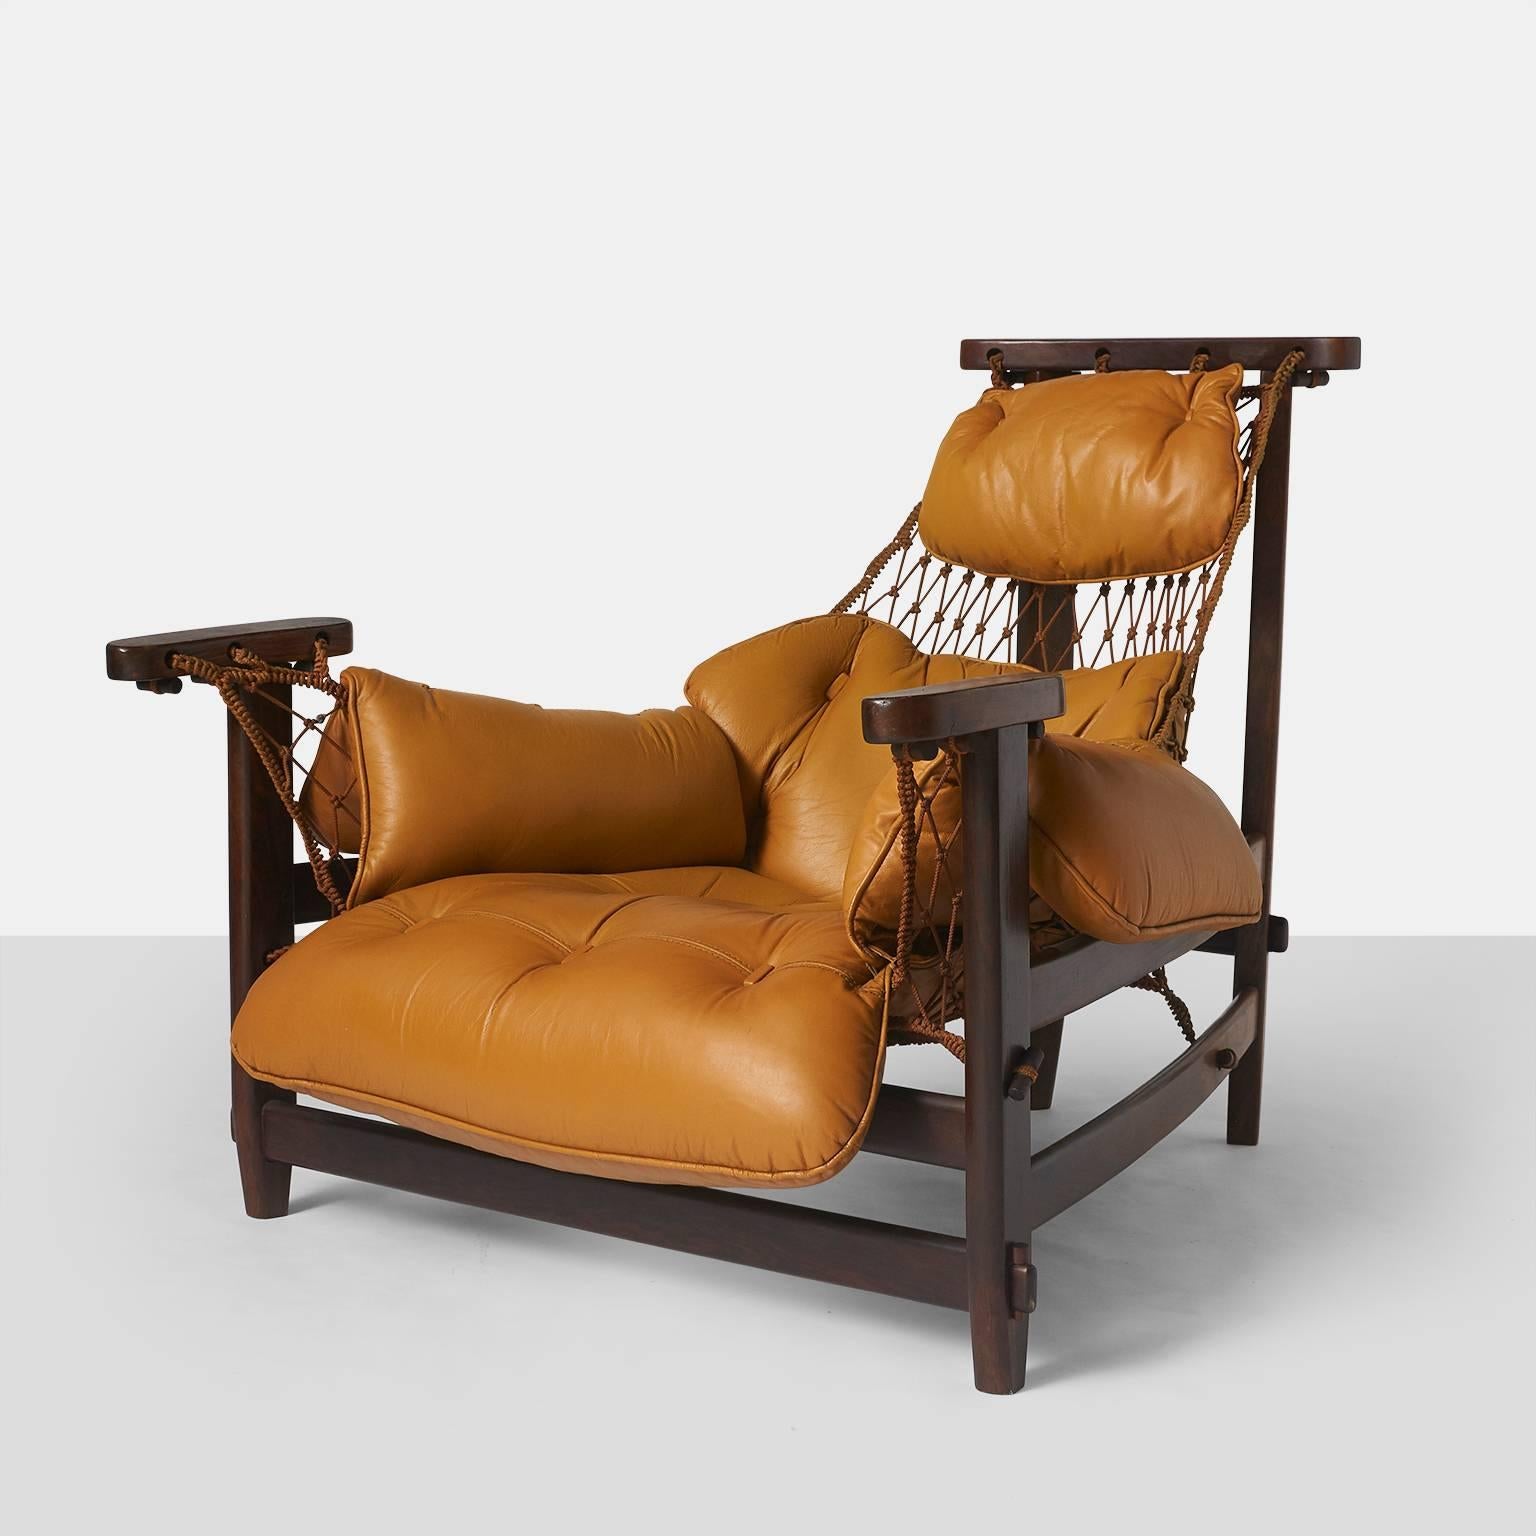 A lounge chair in jacaranda by Jean Gillon with woven rope sling that carries the tufted leather cushion. Retains the original label.
Brazil, circa 1960s.